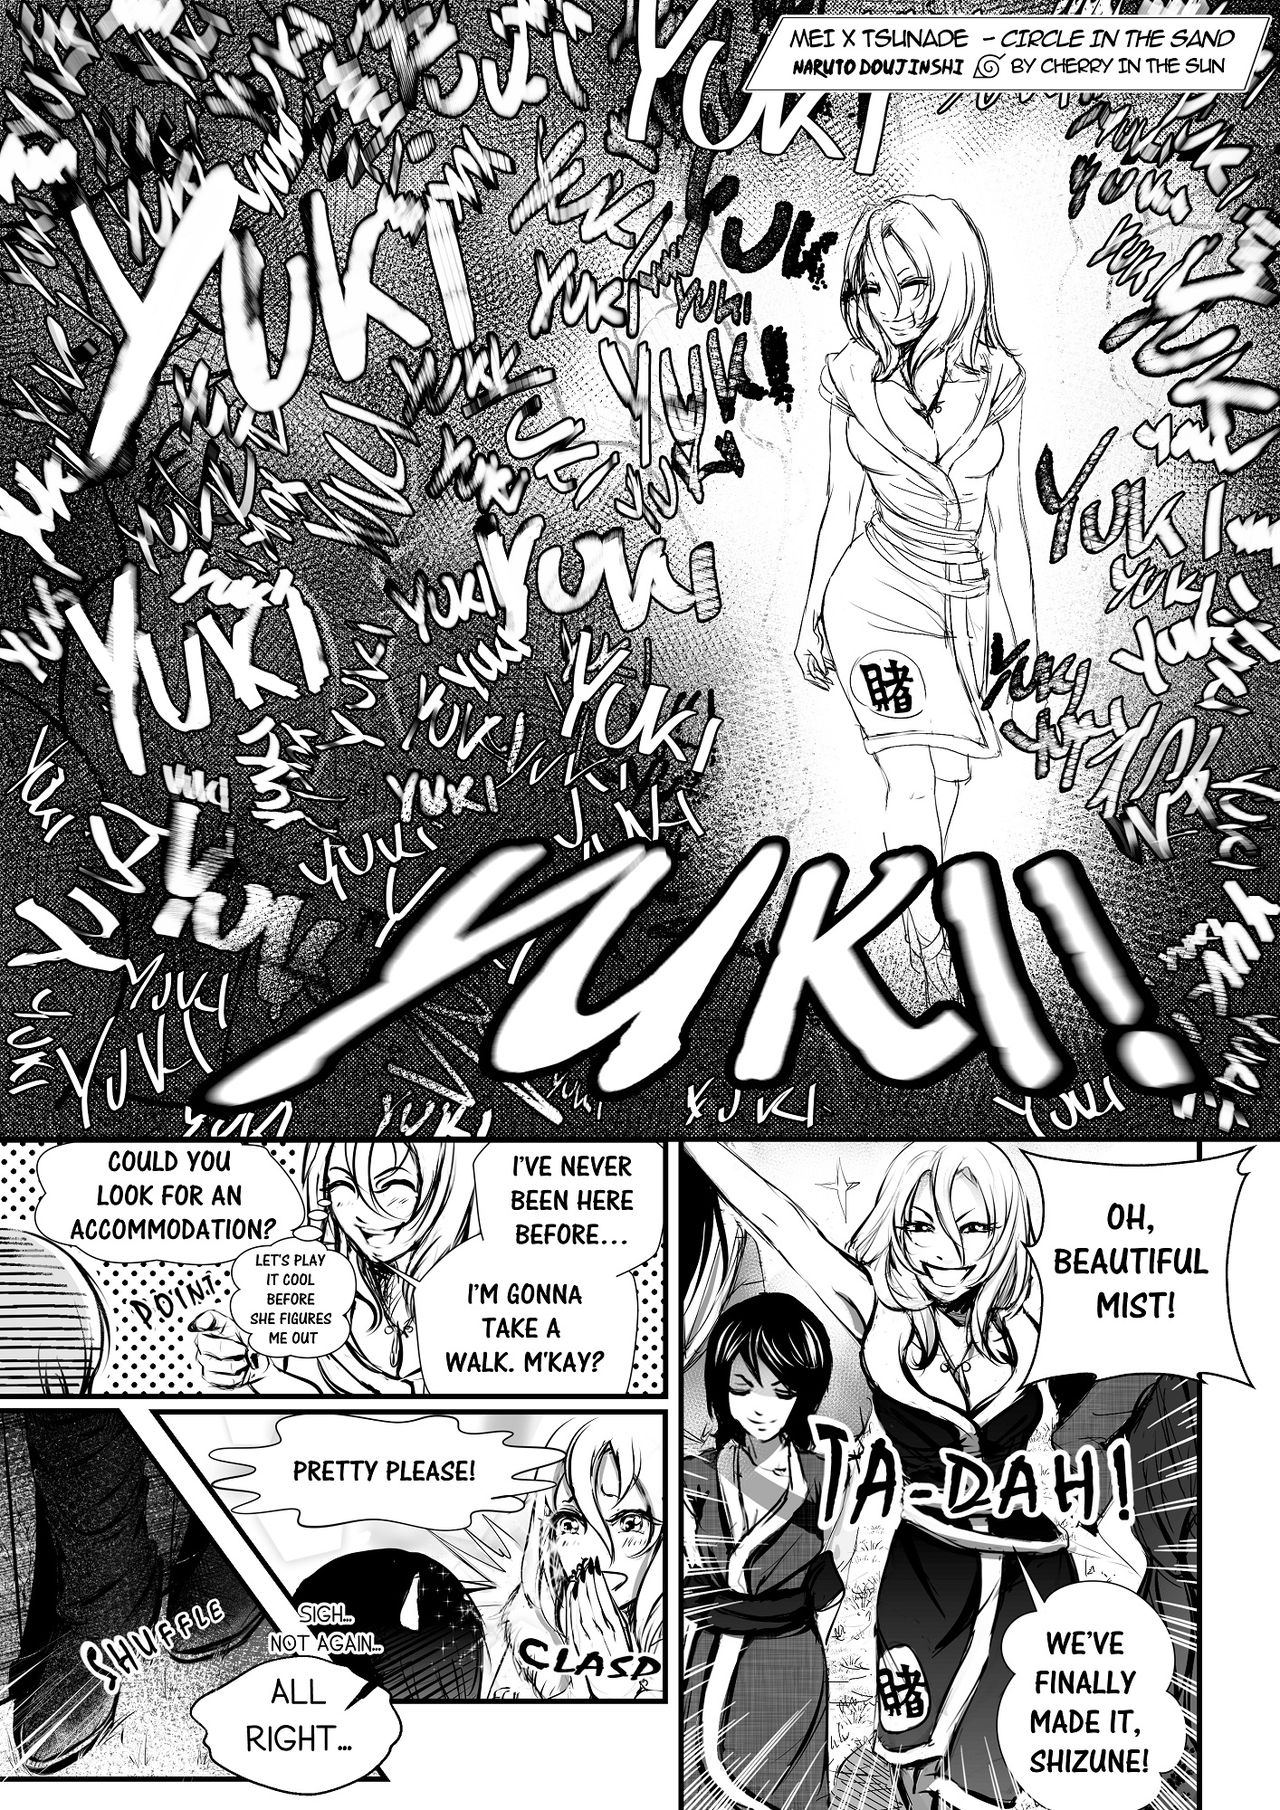 [Cherry in the Sun] Circle in the Sand (Naruto) [English] 